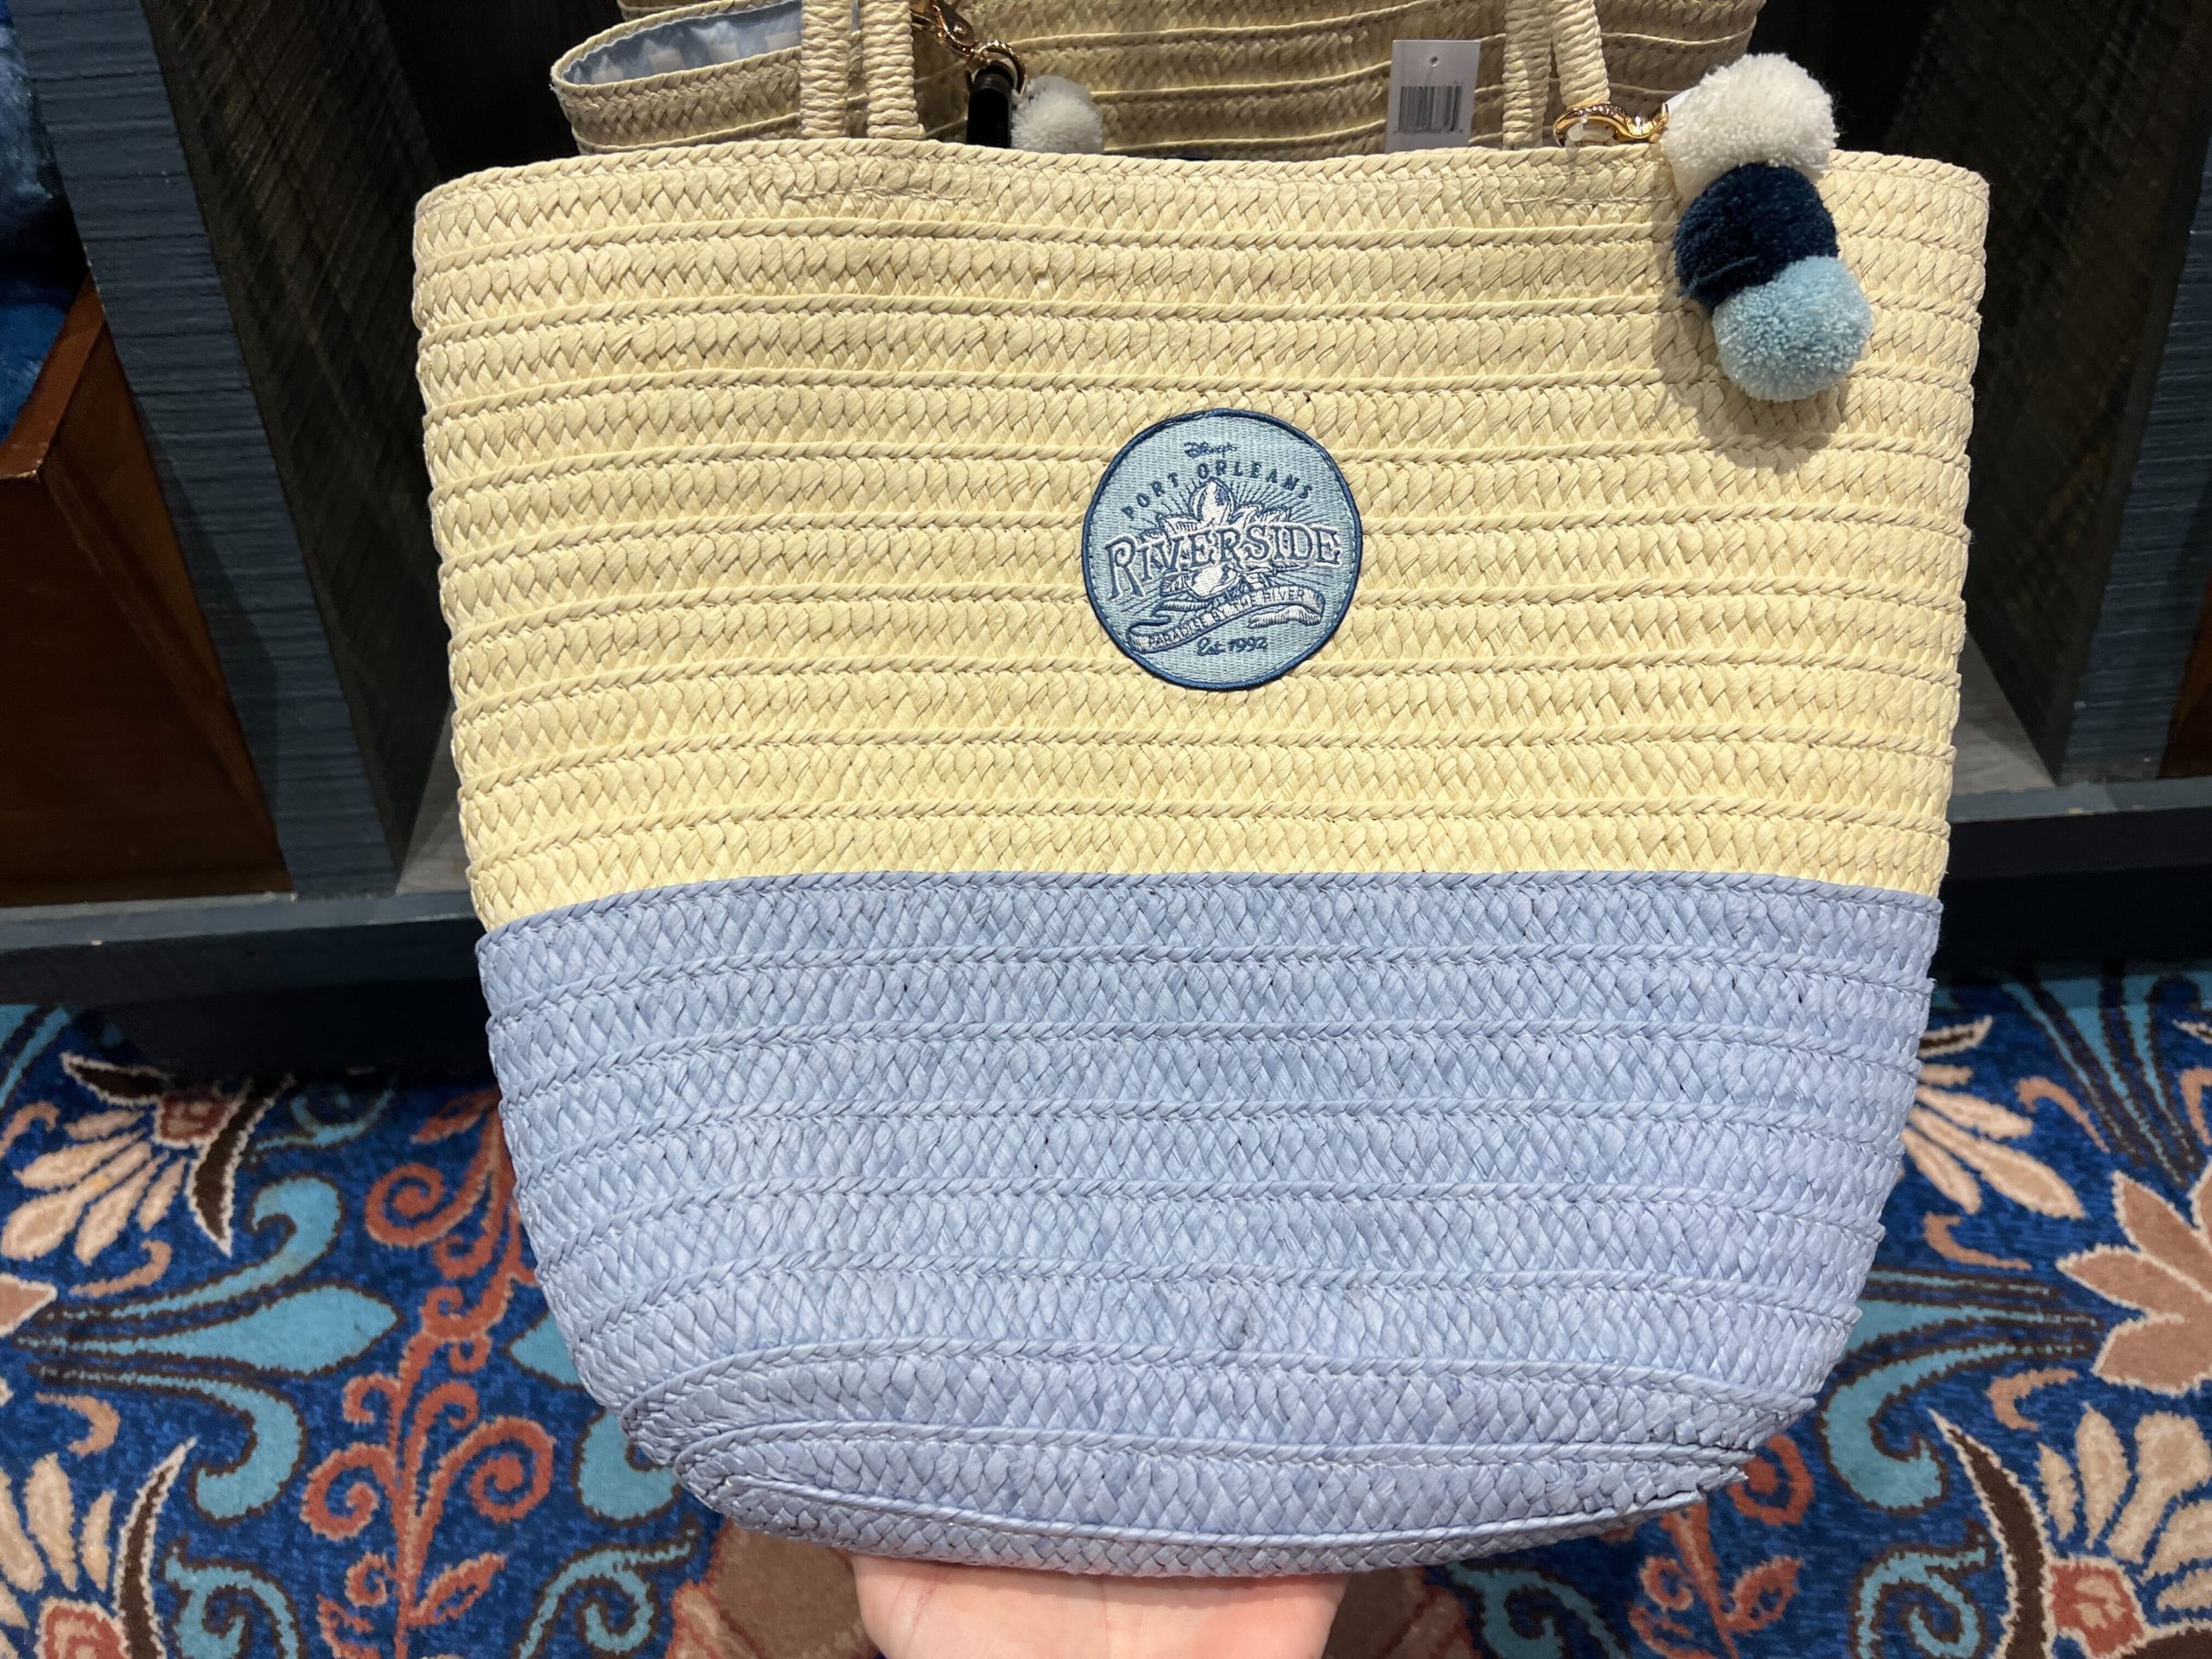 NEW Port Orleans Riverside Bag Spotted at Fulton's General Store